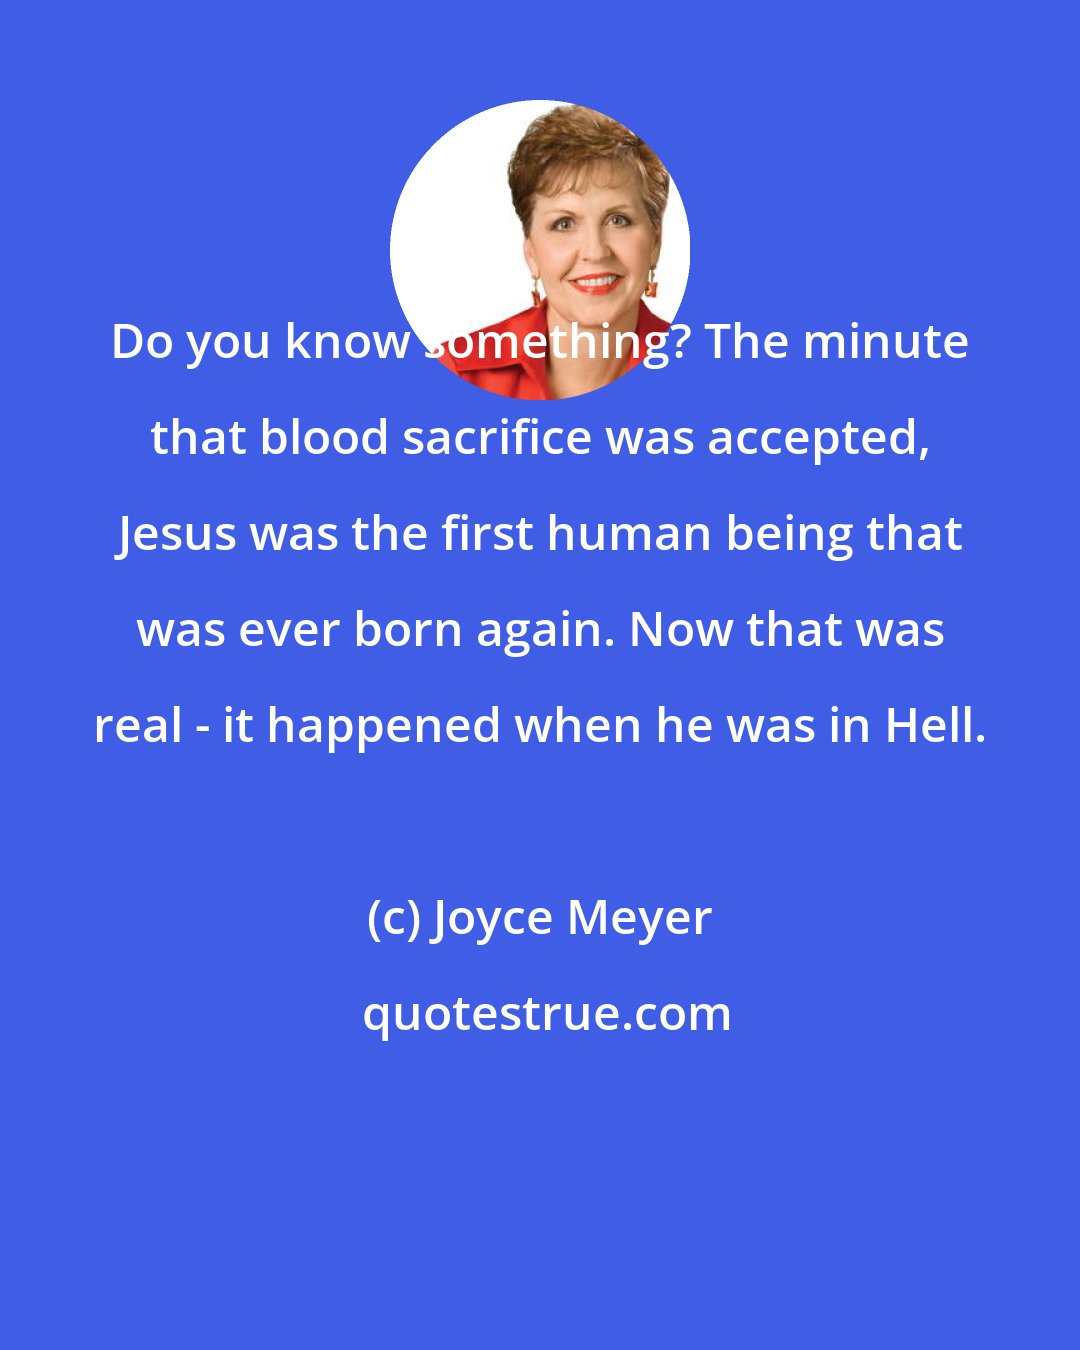 Joyce Meyer: Do you know something? The minute that blood sacrifice was accepted, Jesus was the first human being that was ever born again. Now that was real - it happened when he was in Hell.